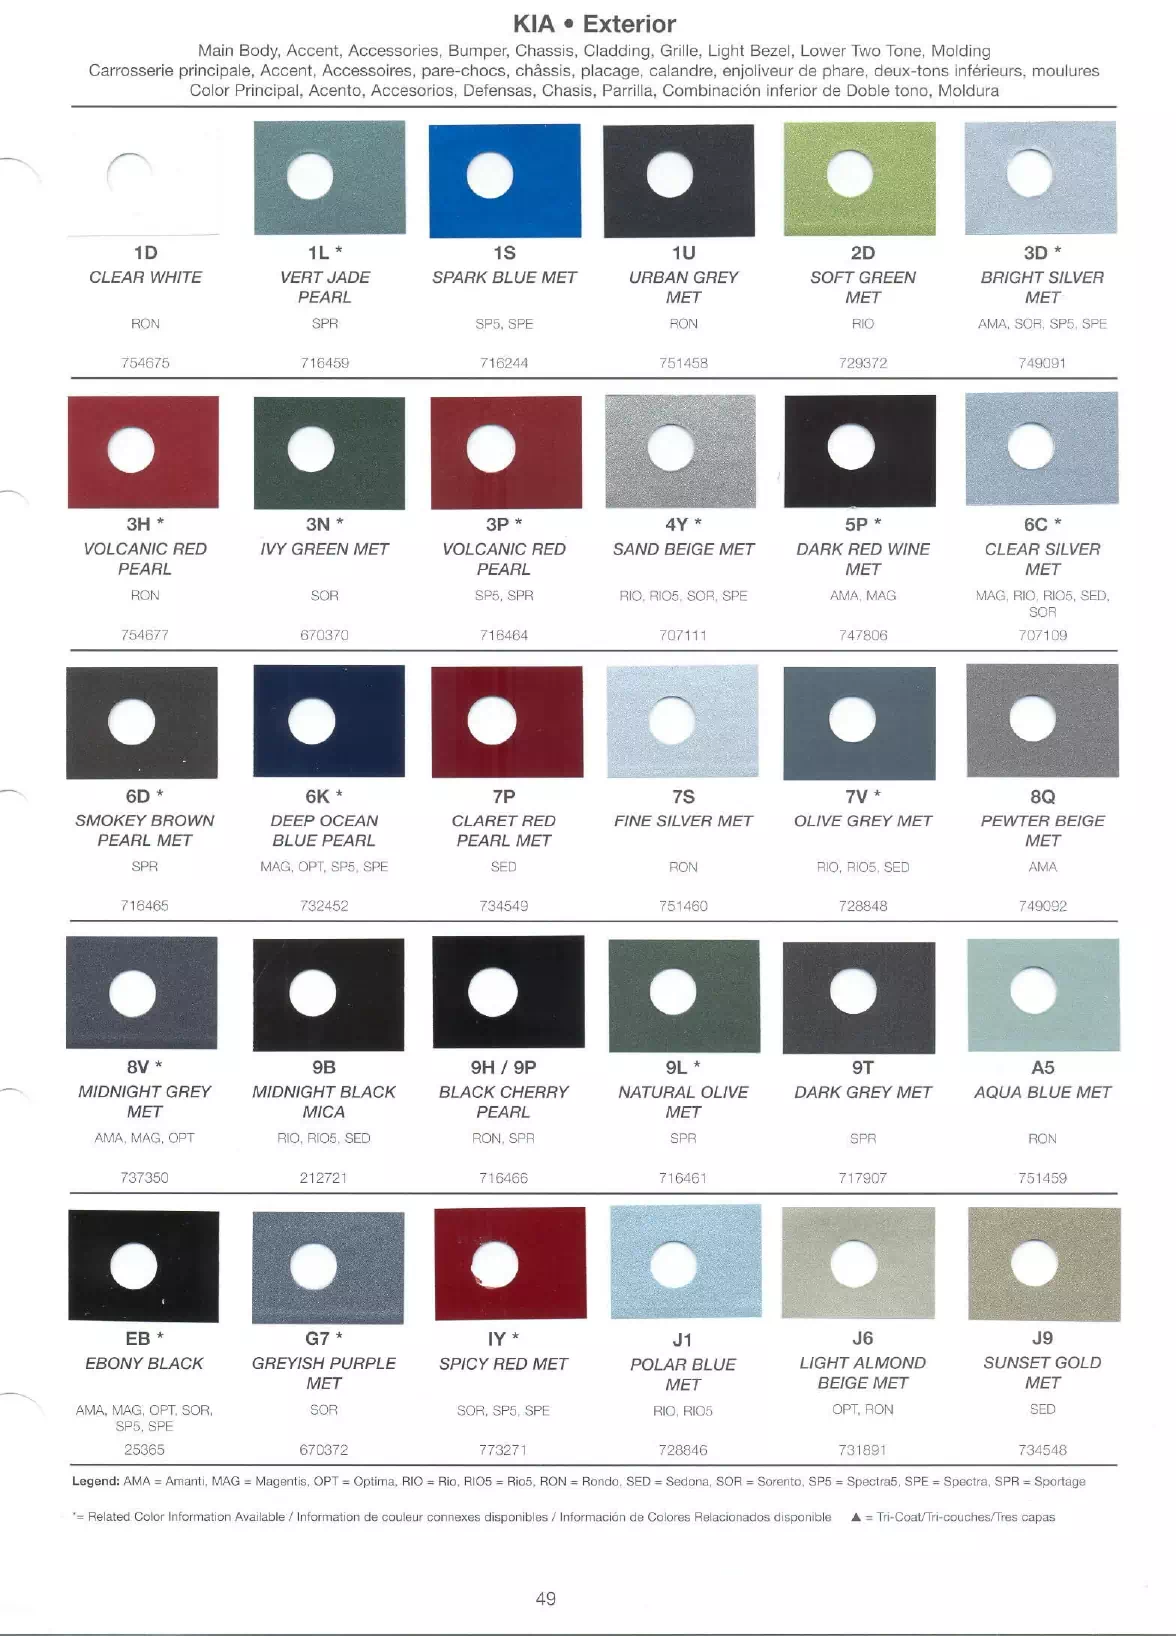 paint swatches and or codes for the 2008 kia's